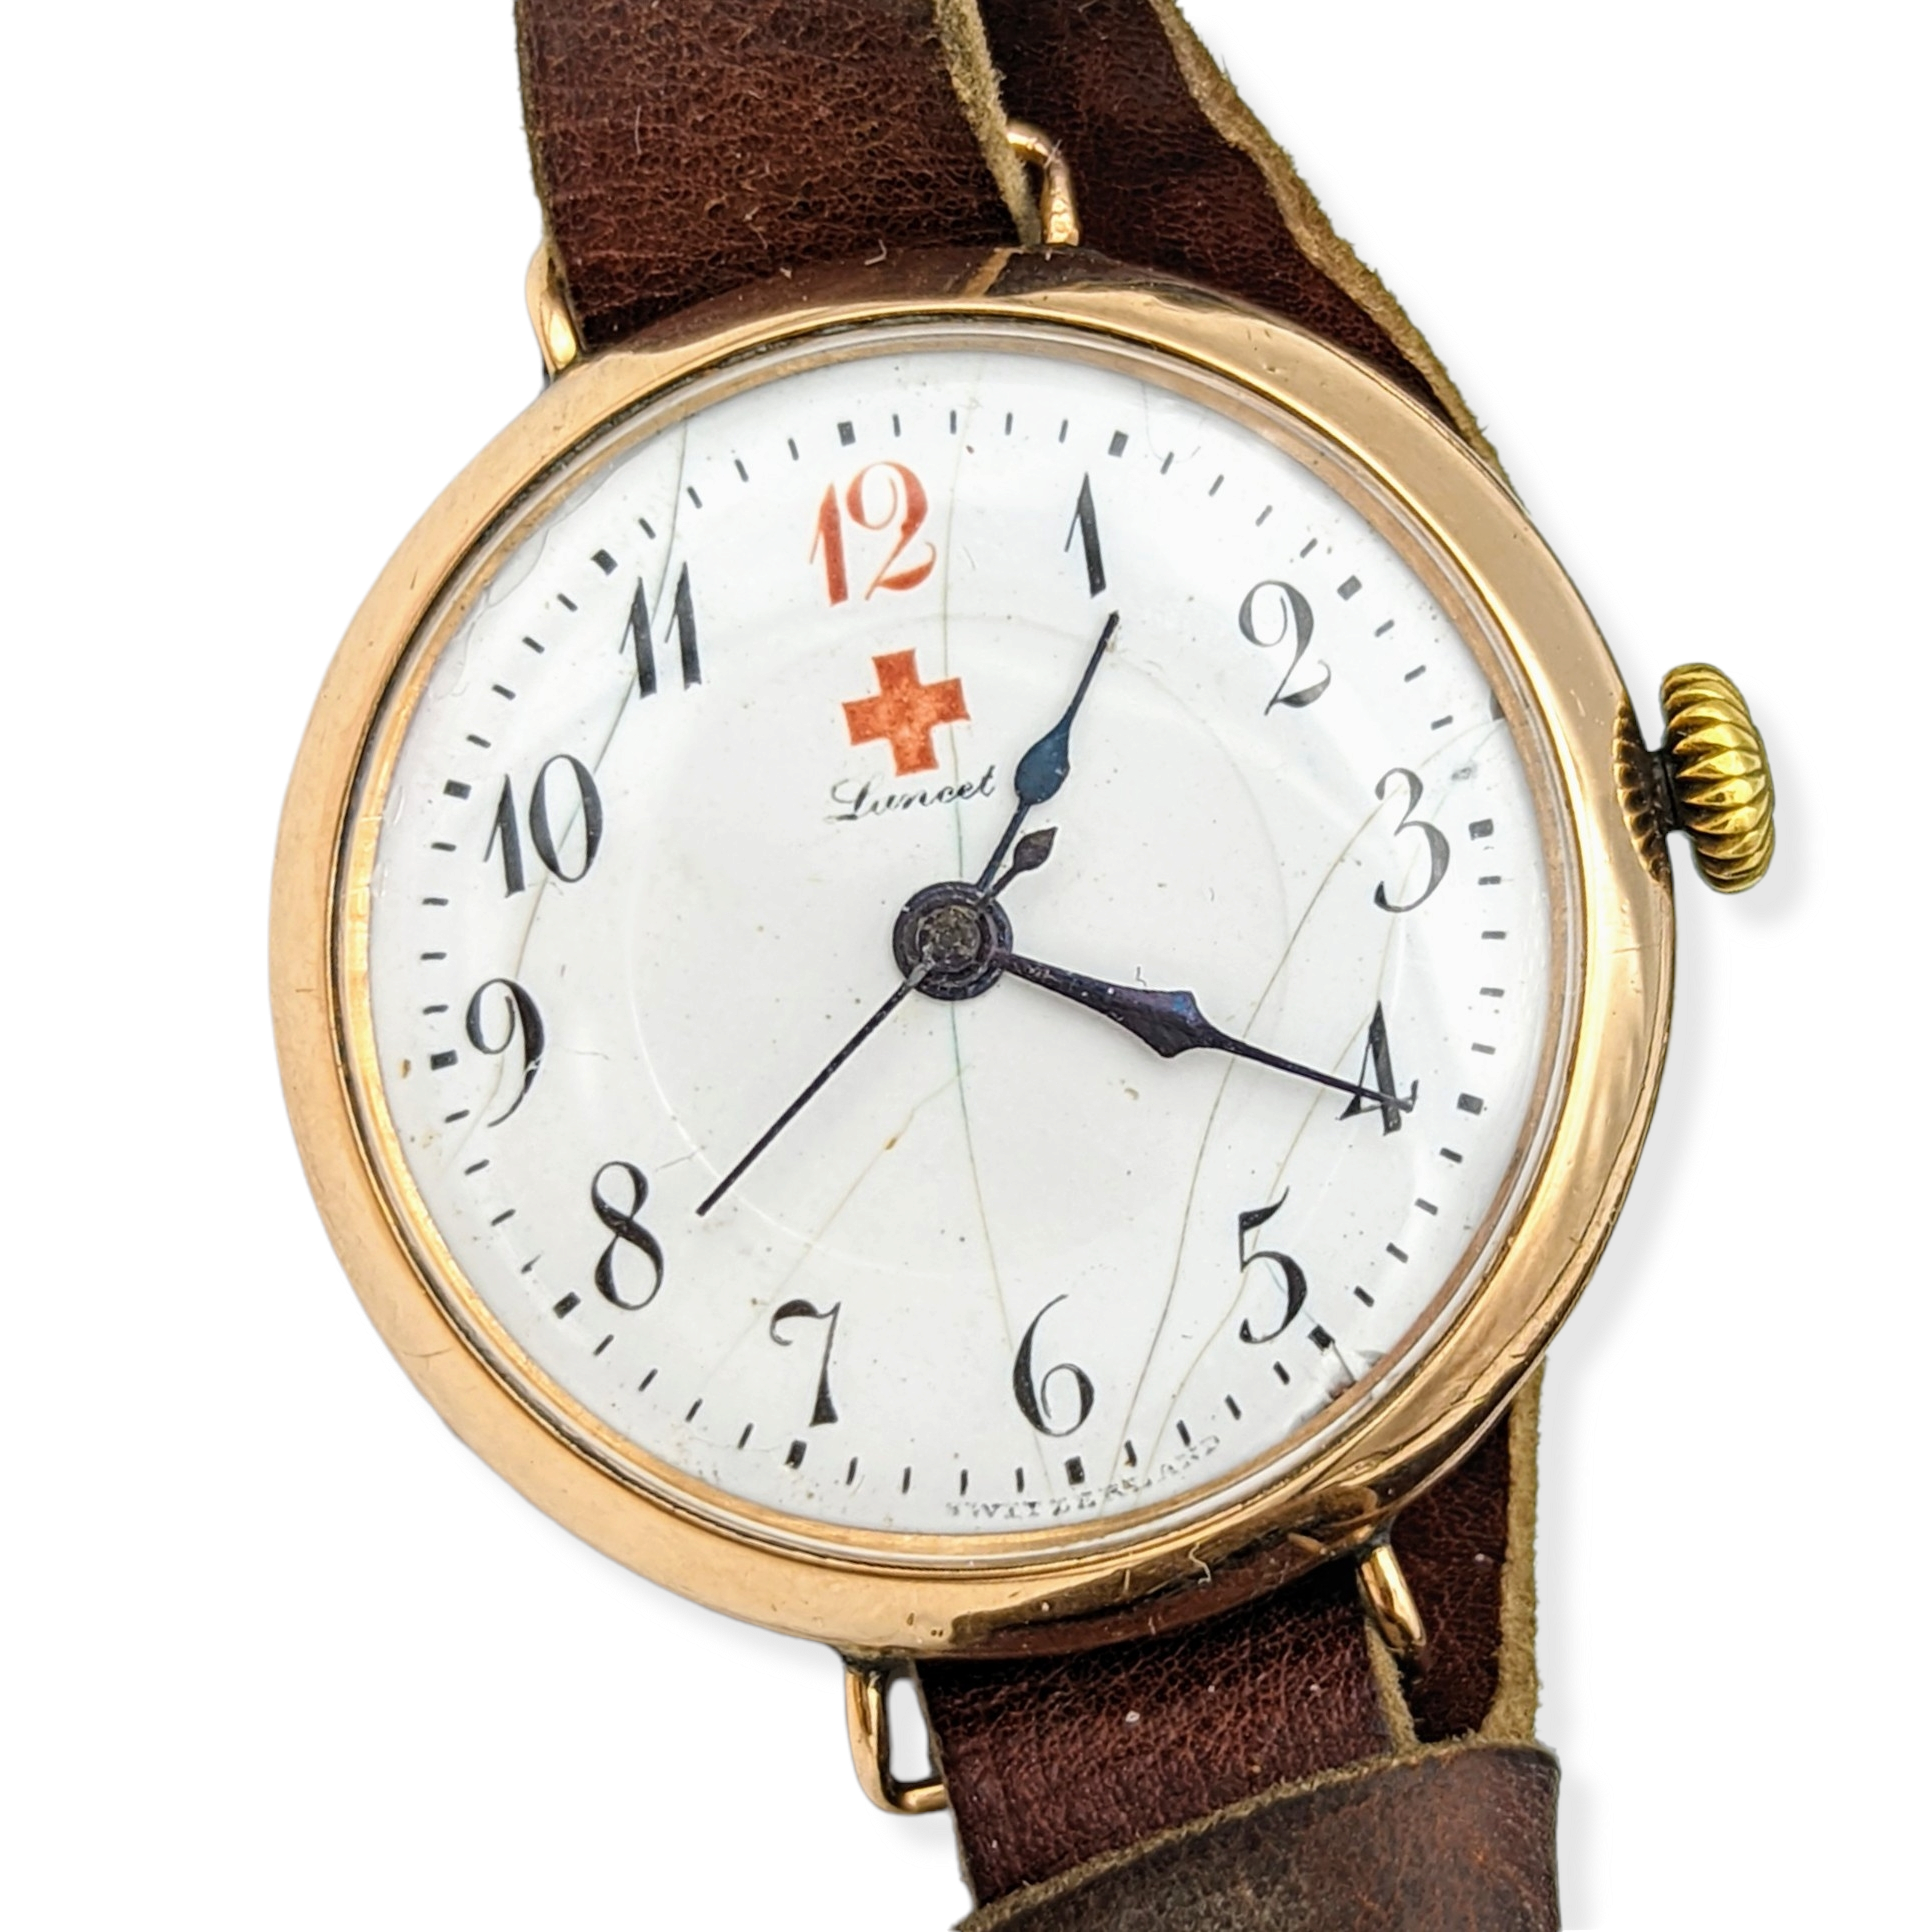 Lancet Red Cross Medical Wristwatch - WWI Trench Watch - REBBERG –